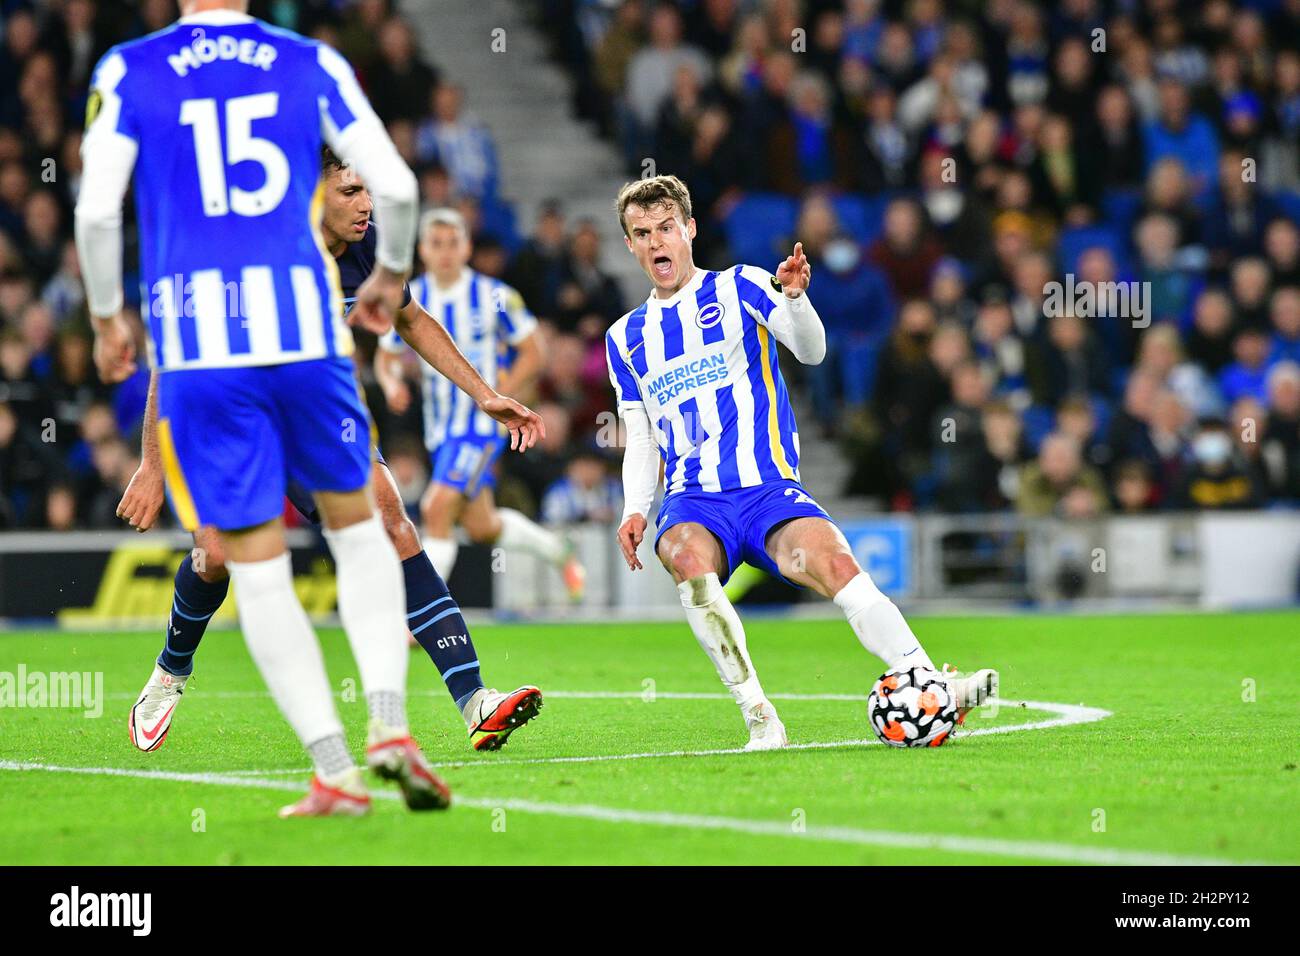 Brighton, UK. 23rd Oct, 2021. Solly March of Brighton and Hove Albion keeps control of the ball during the Premier League match between Brighton & Hove Albion and Manchester City at The Amex on October 23rd 2021 in Brighton, England. (Photo by Jeff Mood/phcimages.com) Credit: PHC Images/Alamy Live News Stock Photo